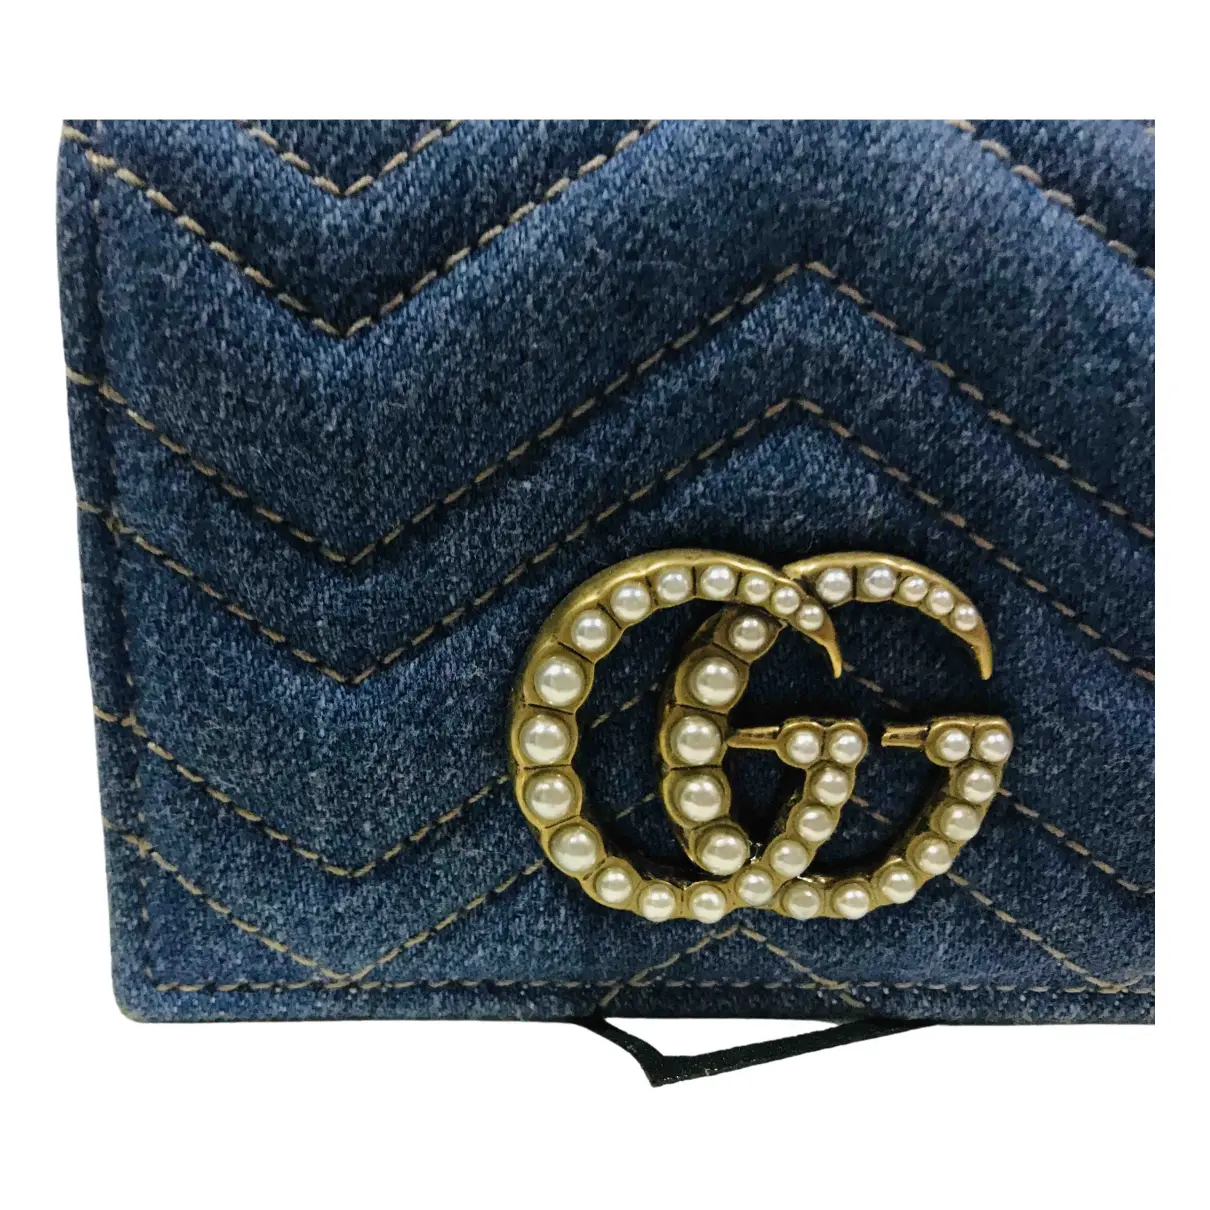 Marmont wallet Gucci